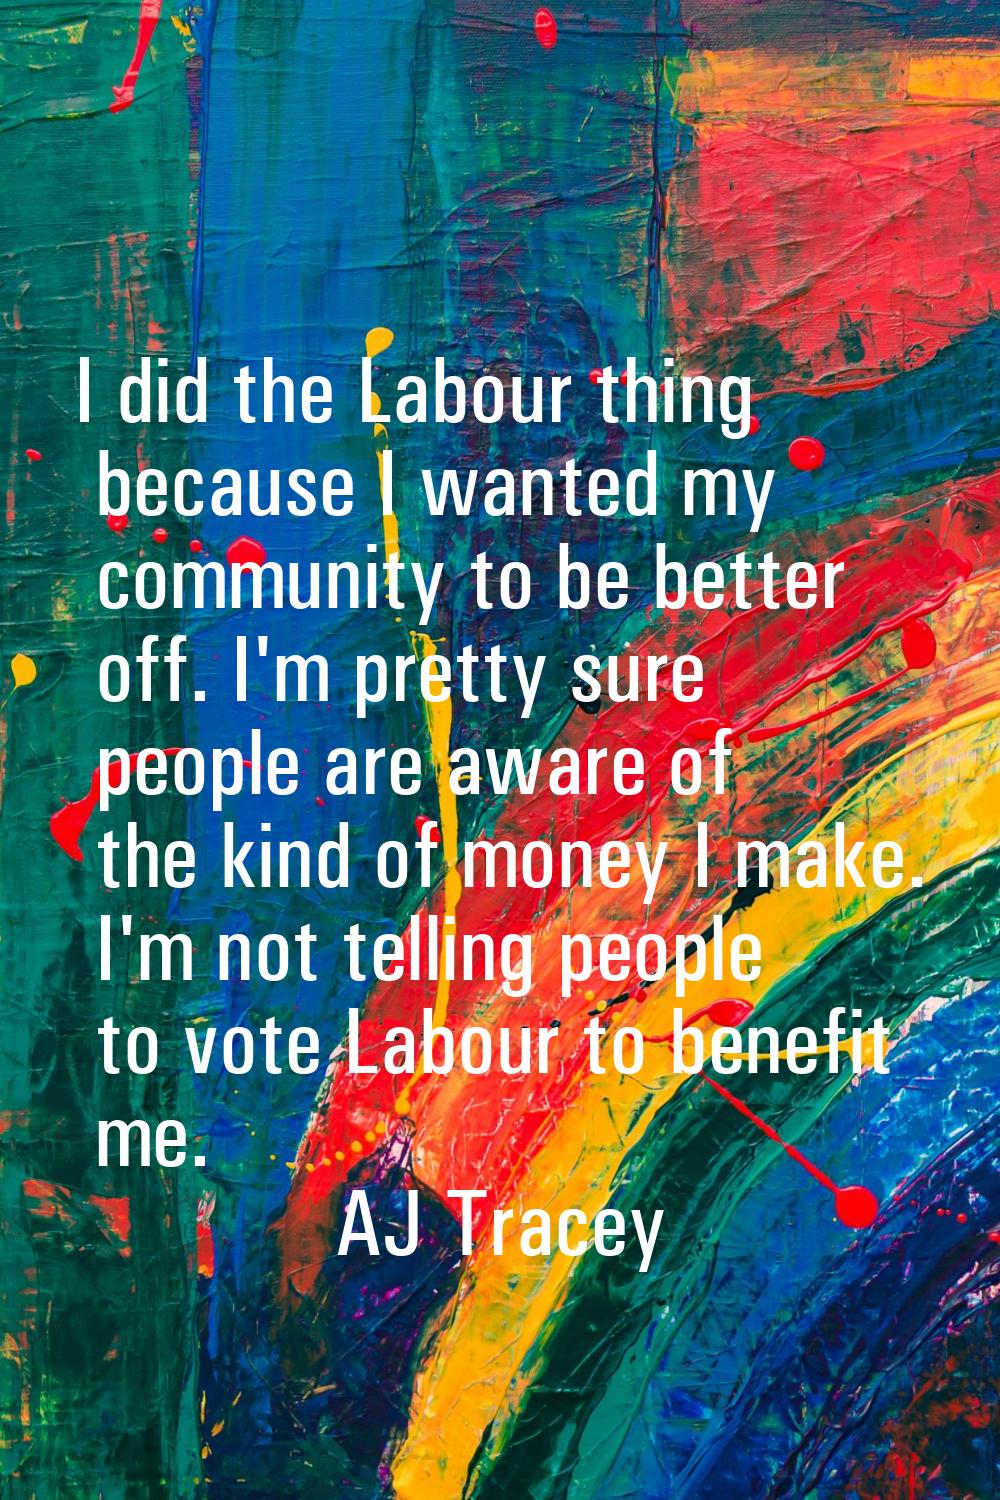 I did the Labour thing because I wanted my community to be better off. I'm pretty sure people are a